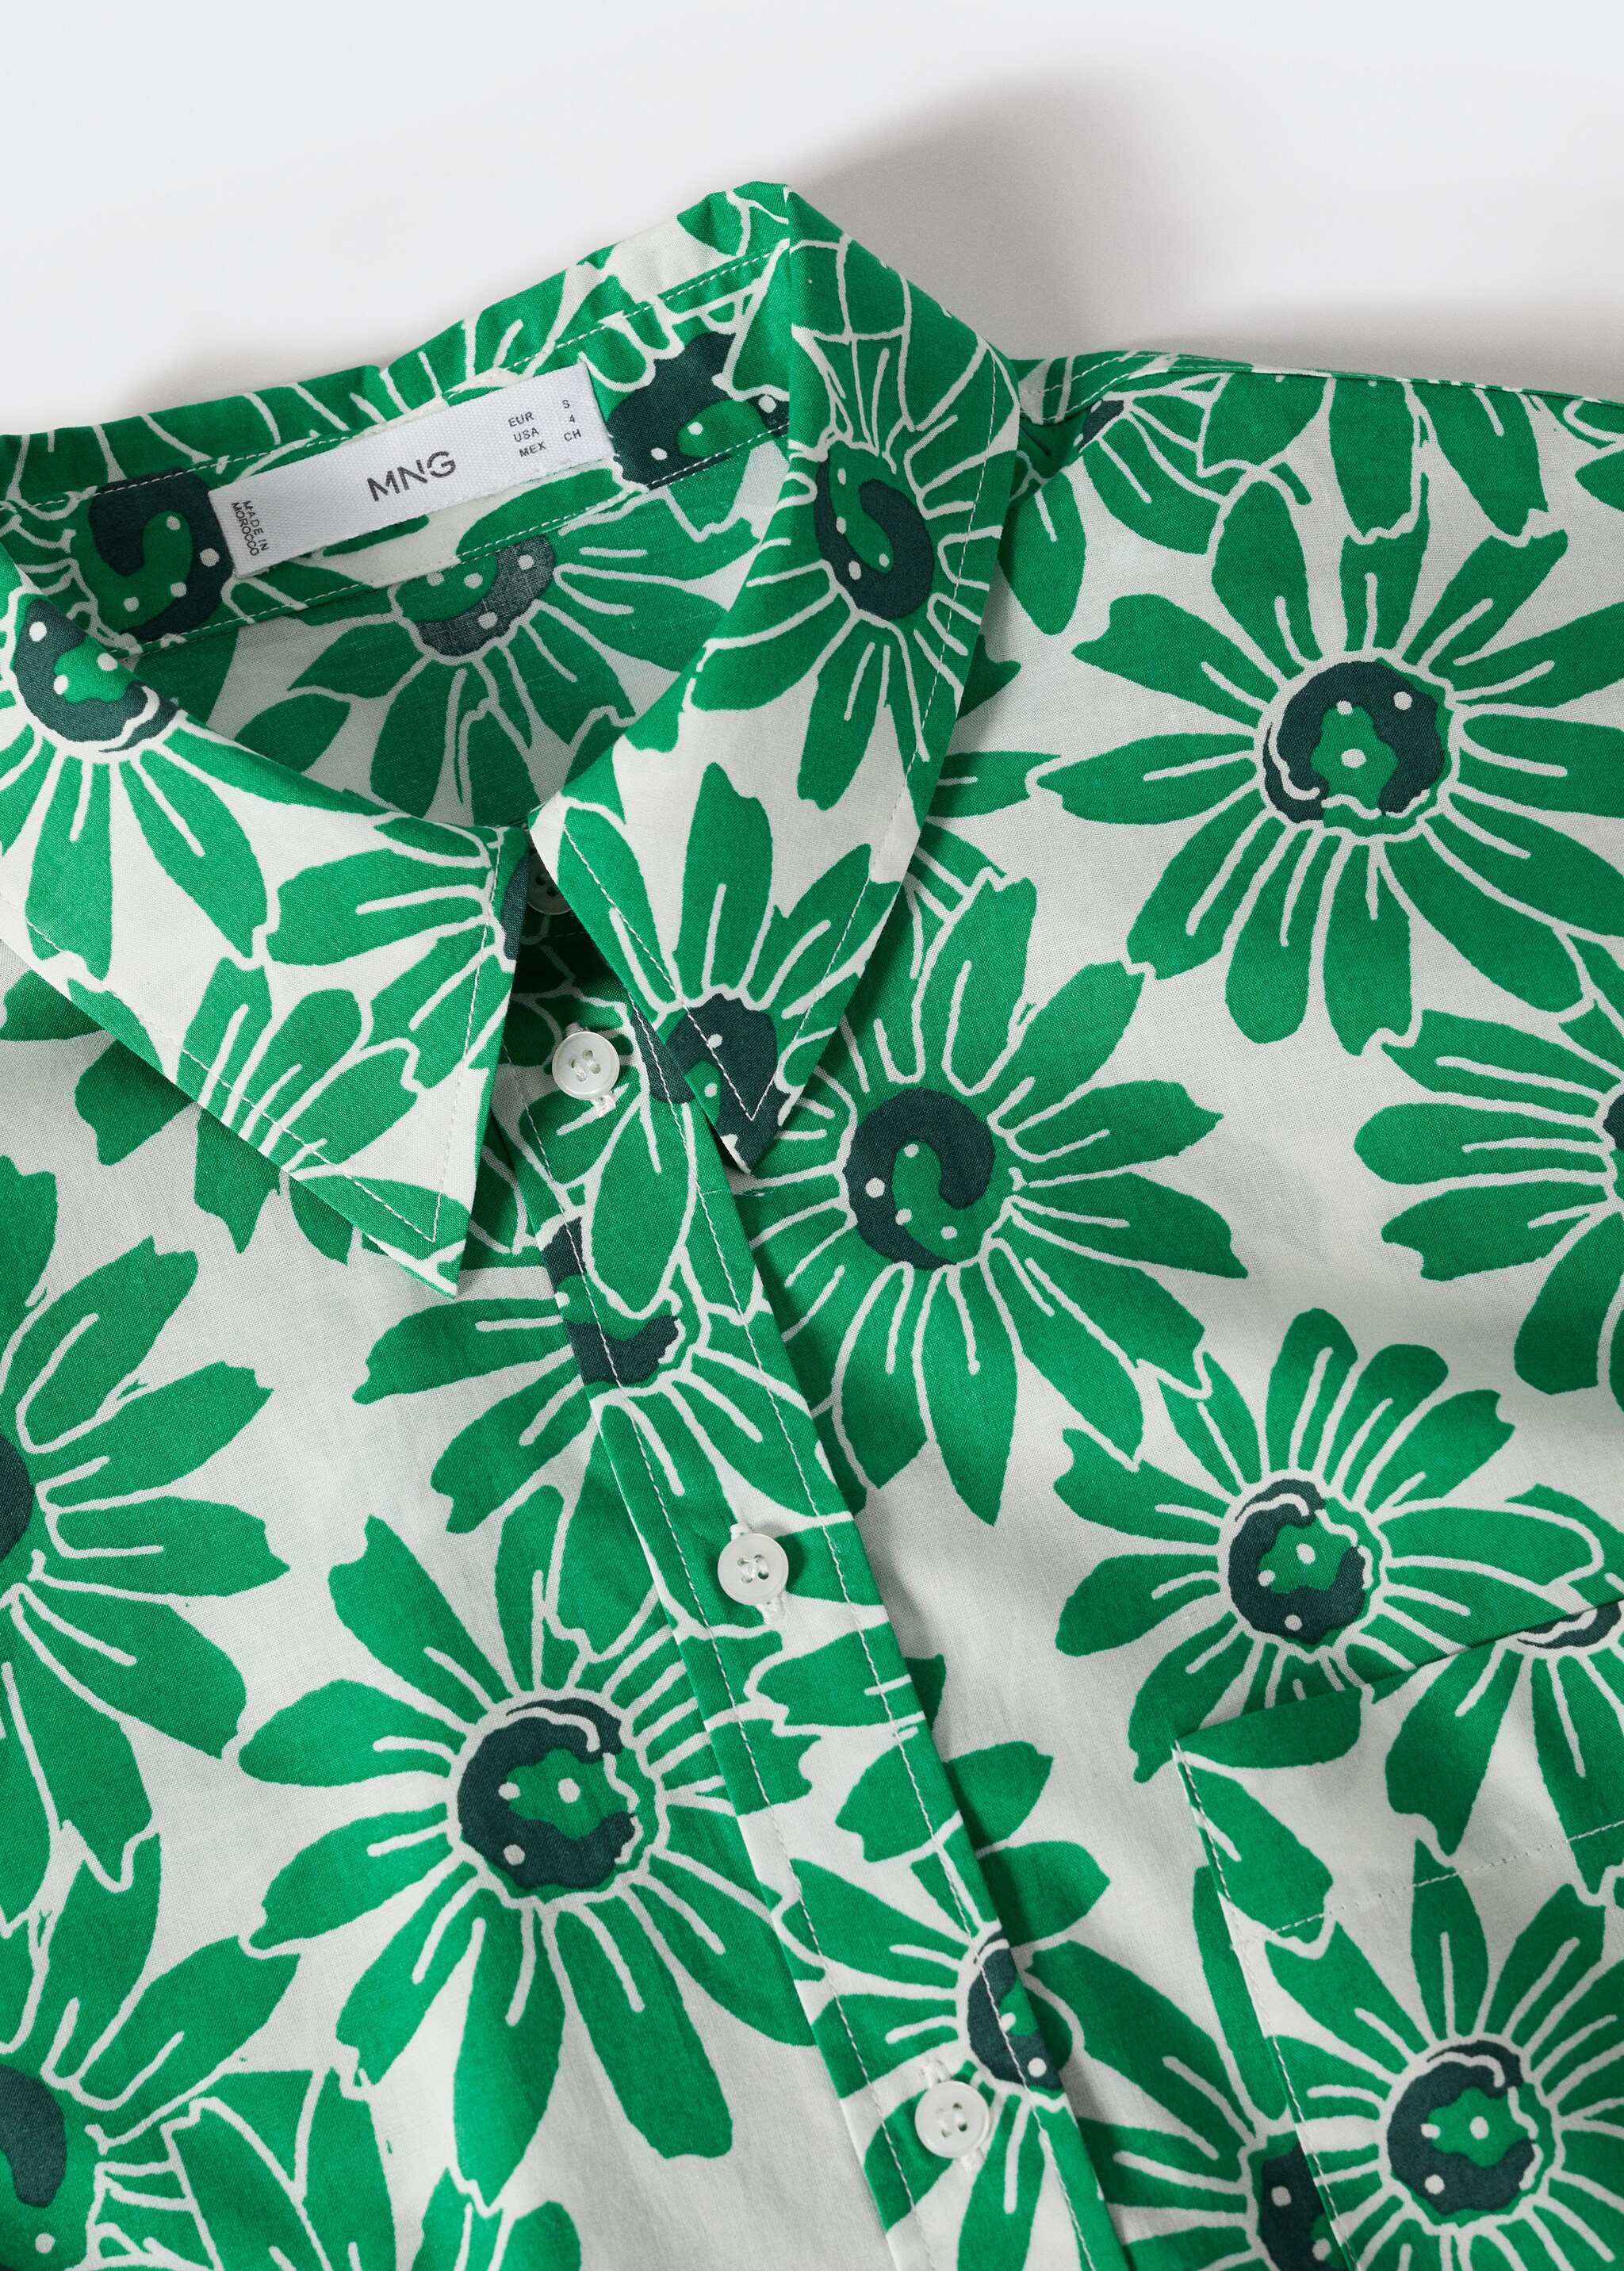 Cotton flower shirt - Details of the article 8